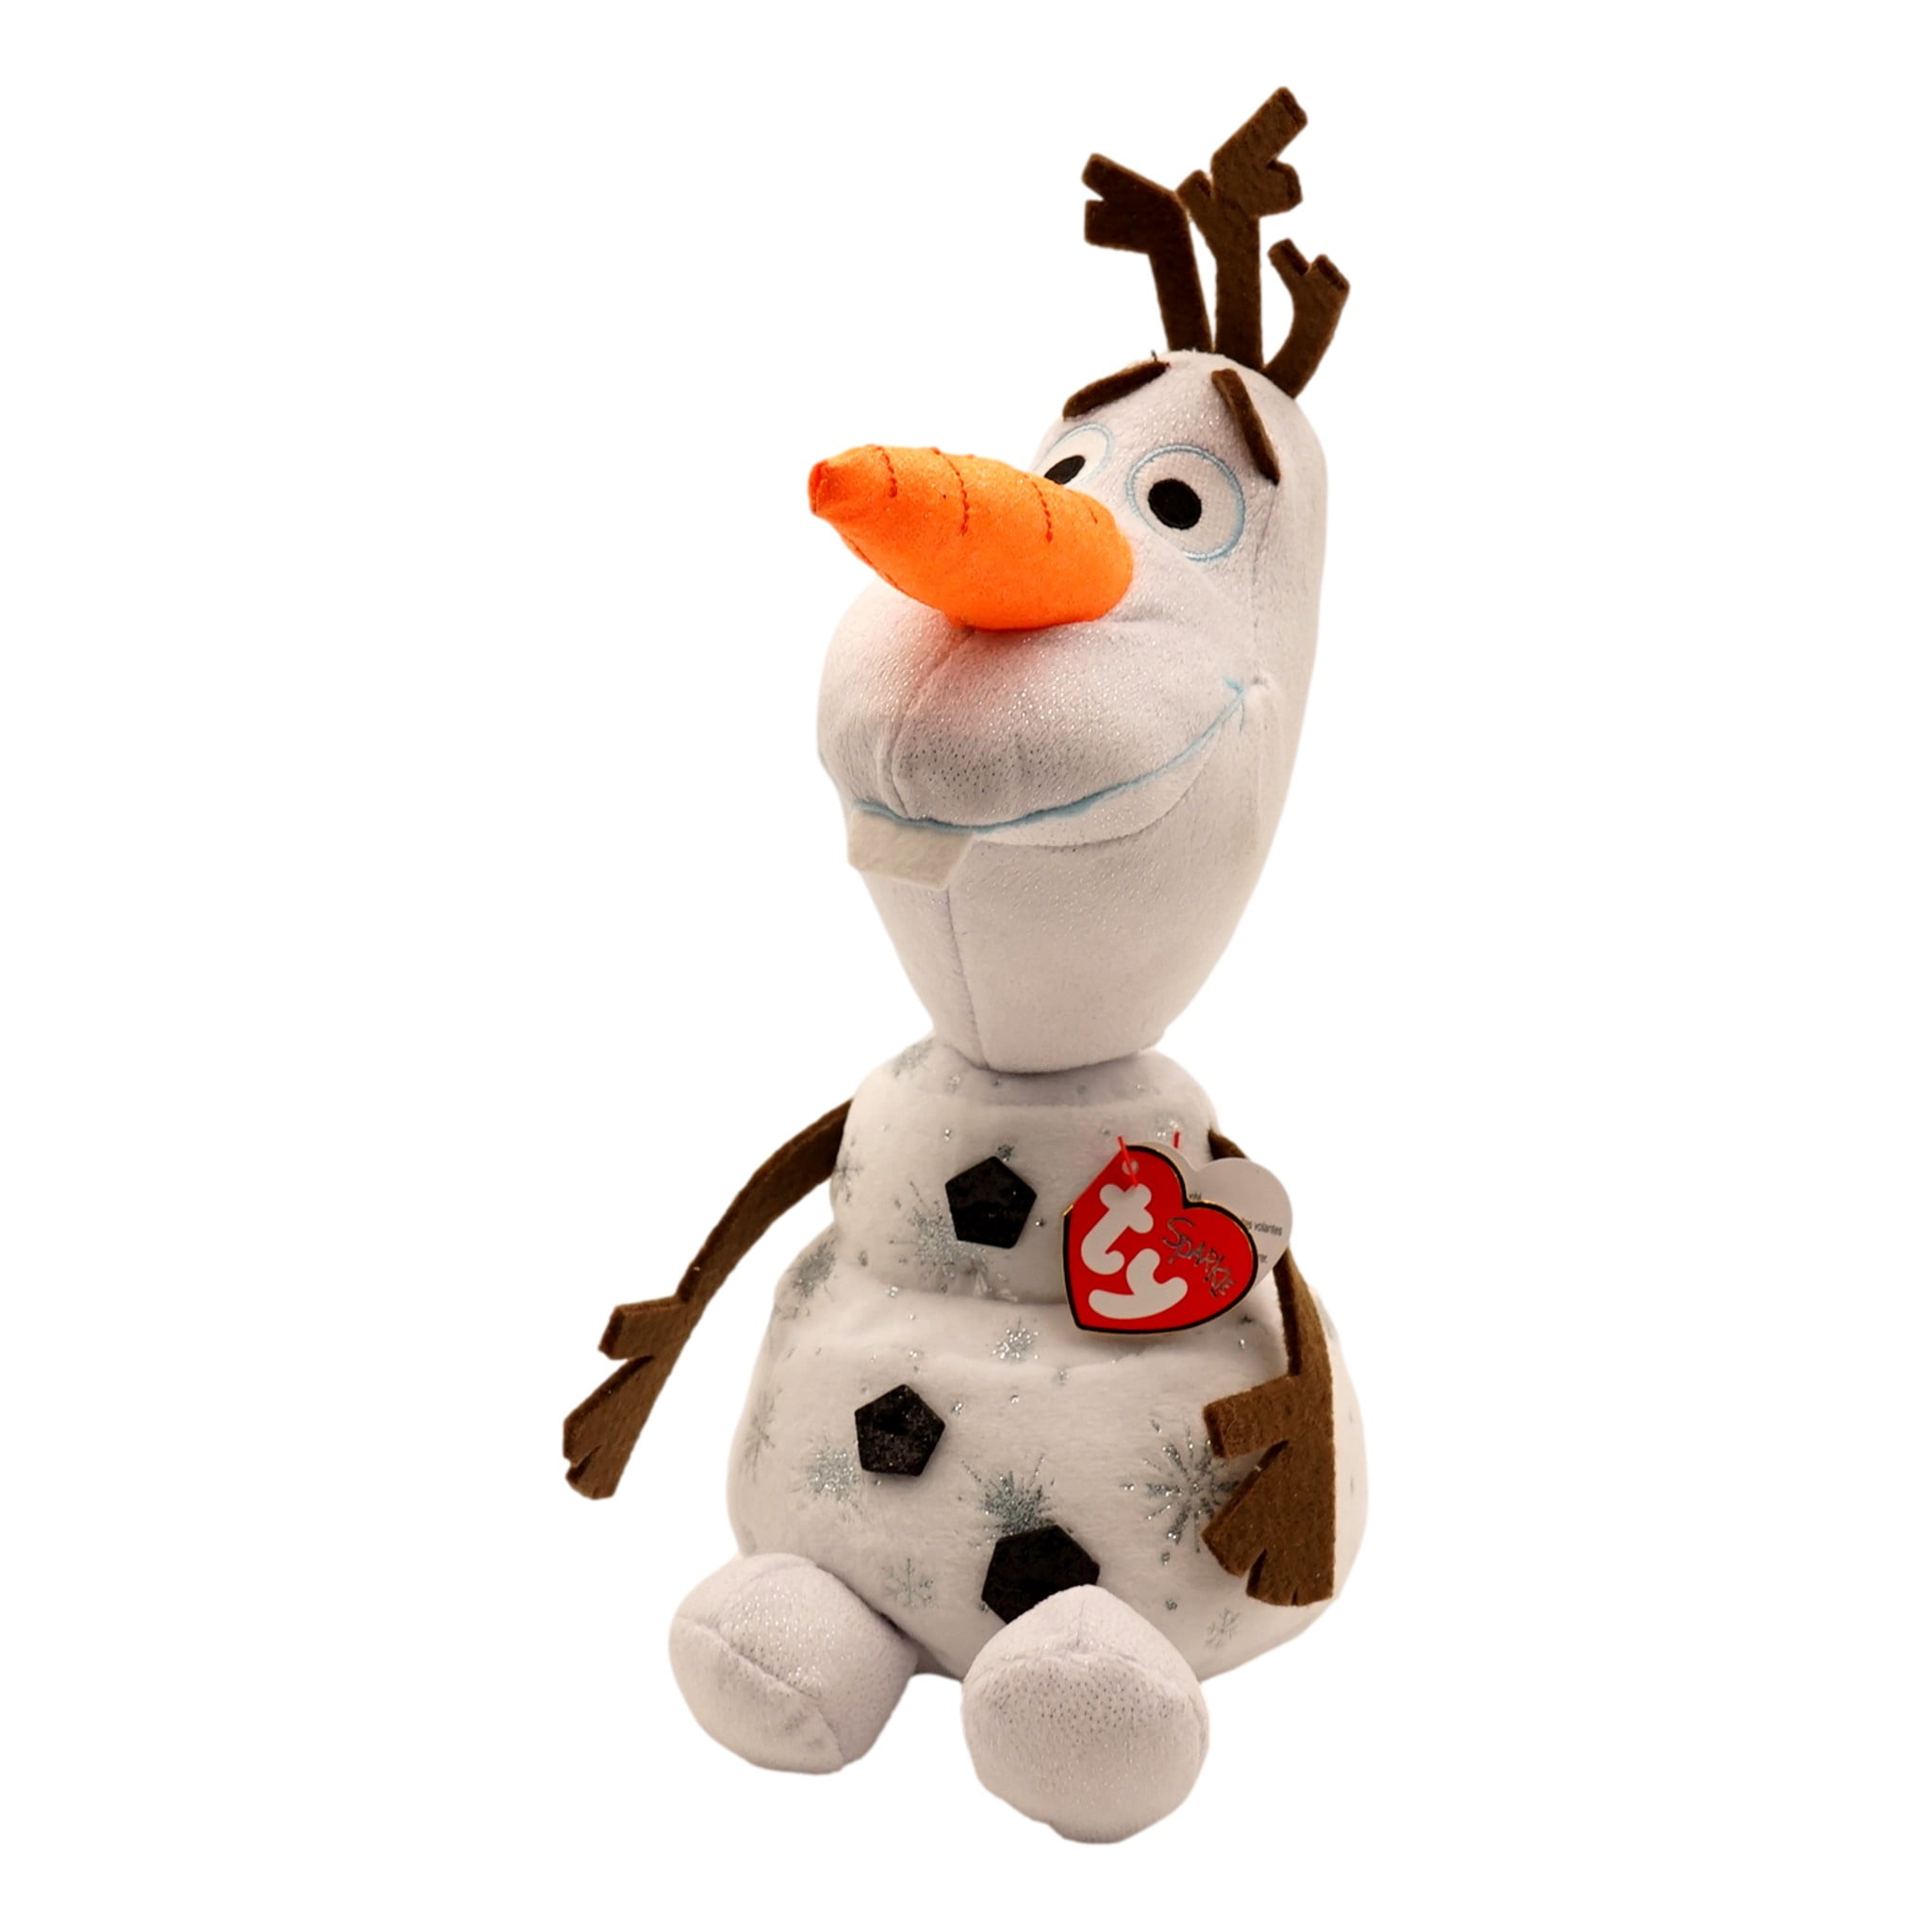 Disney Frozen Olaf the Snowman Plush Doll (10 in) Glitter Nose Sparkle  Fabric Stuffed Animal Collectible